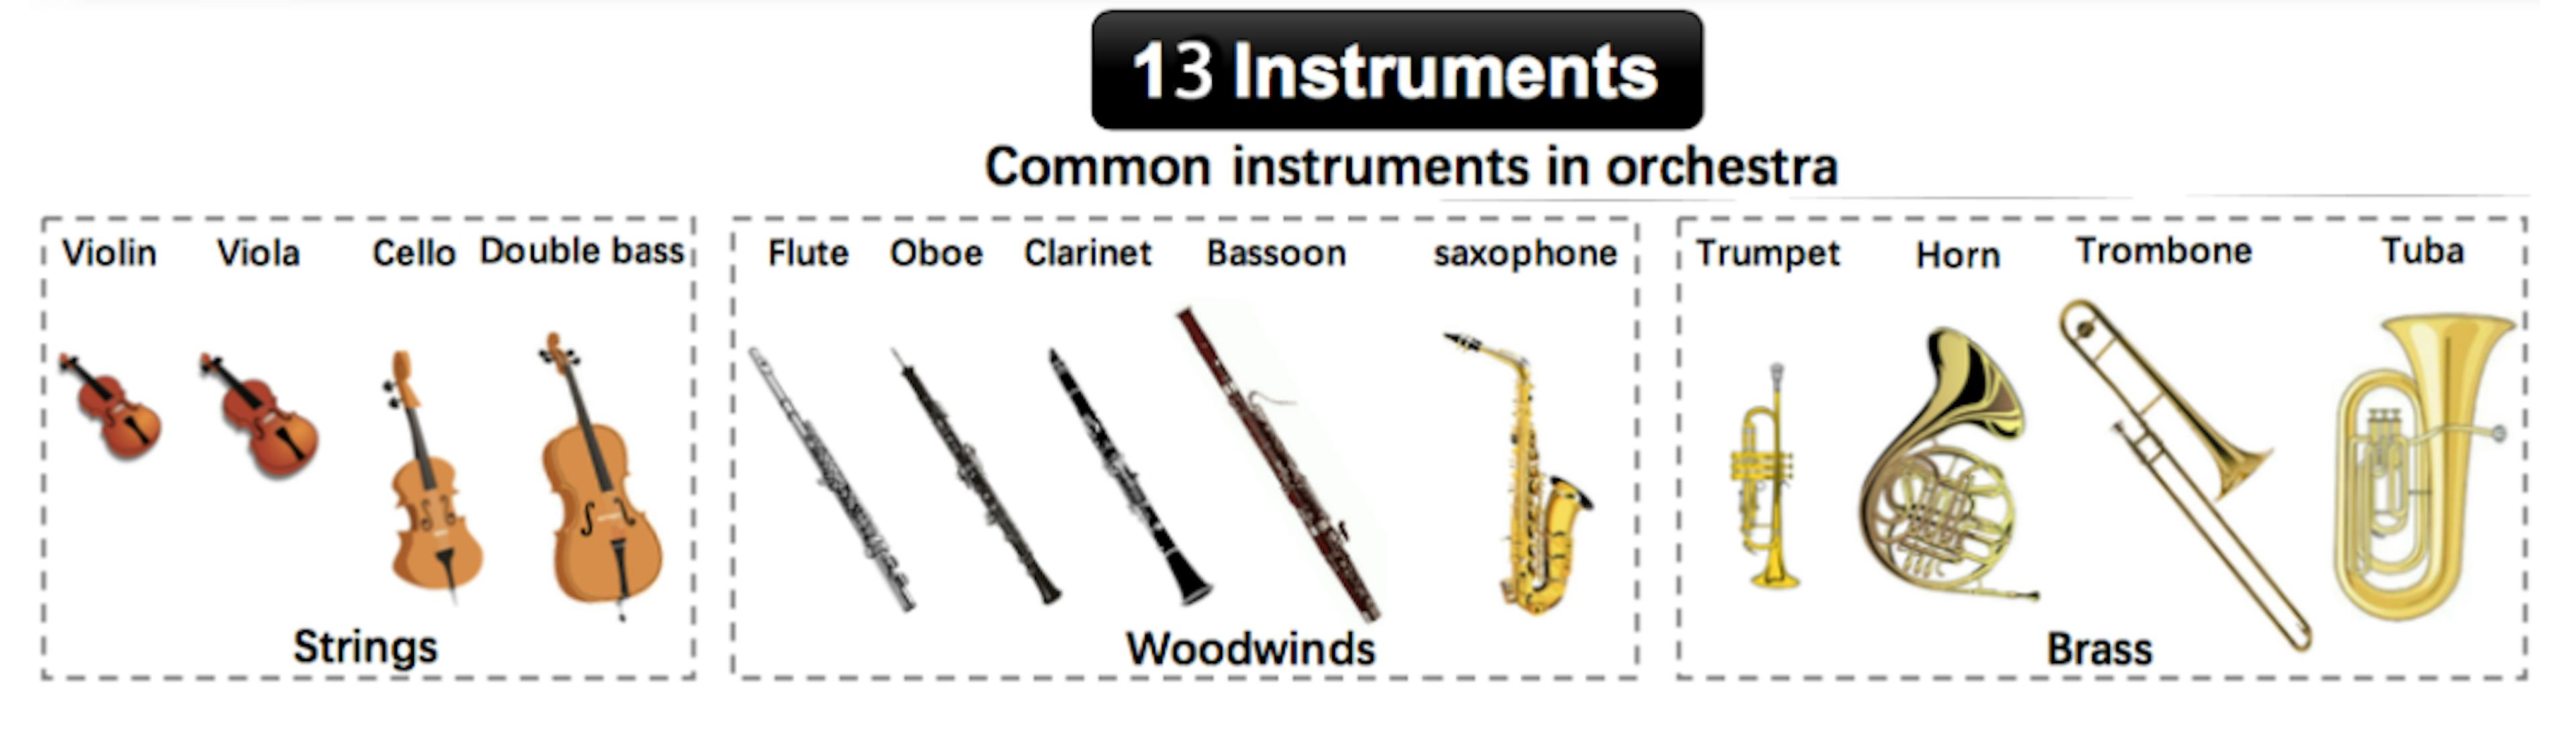 Fig. 1. Solos and URMP instrument categories. Image adapted from [1].